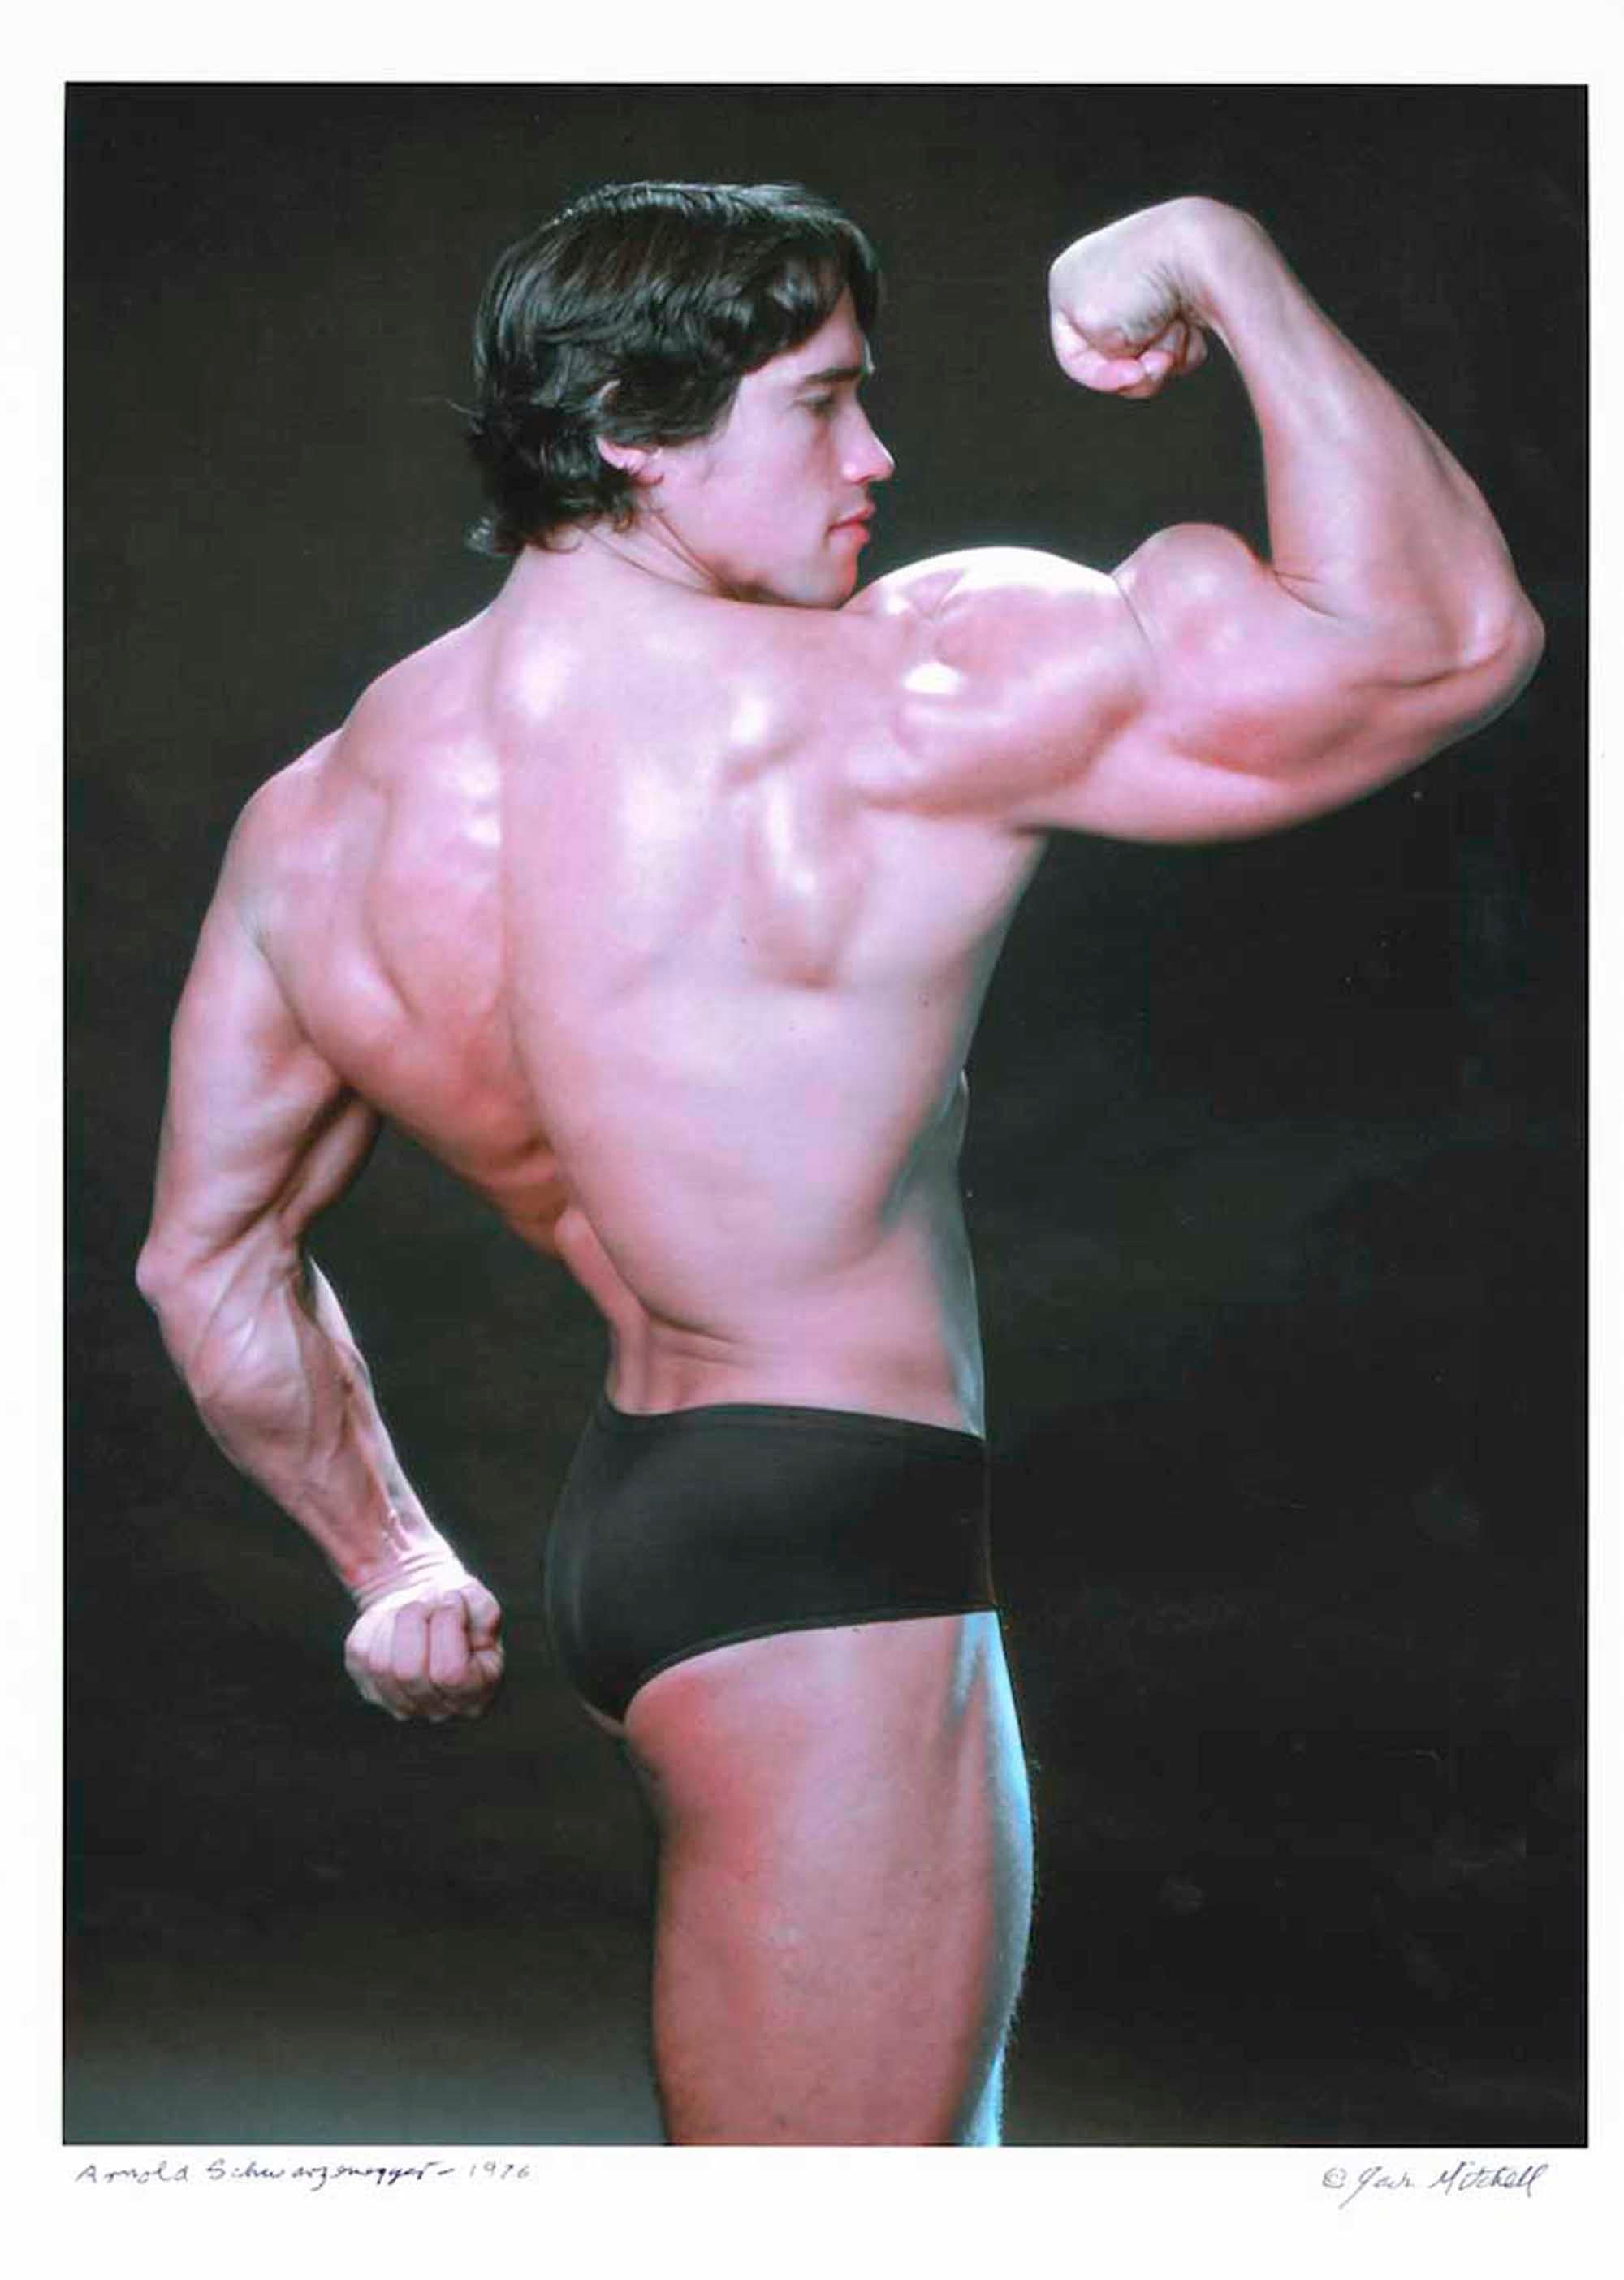 Arnold Schwarzenegger 'After Dark' cover story photo signed by Jack Mitchell